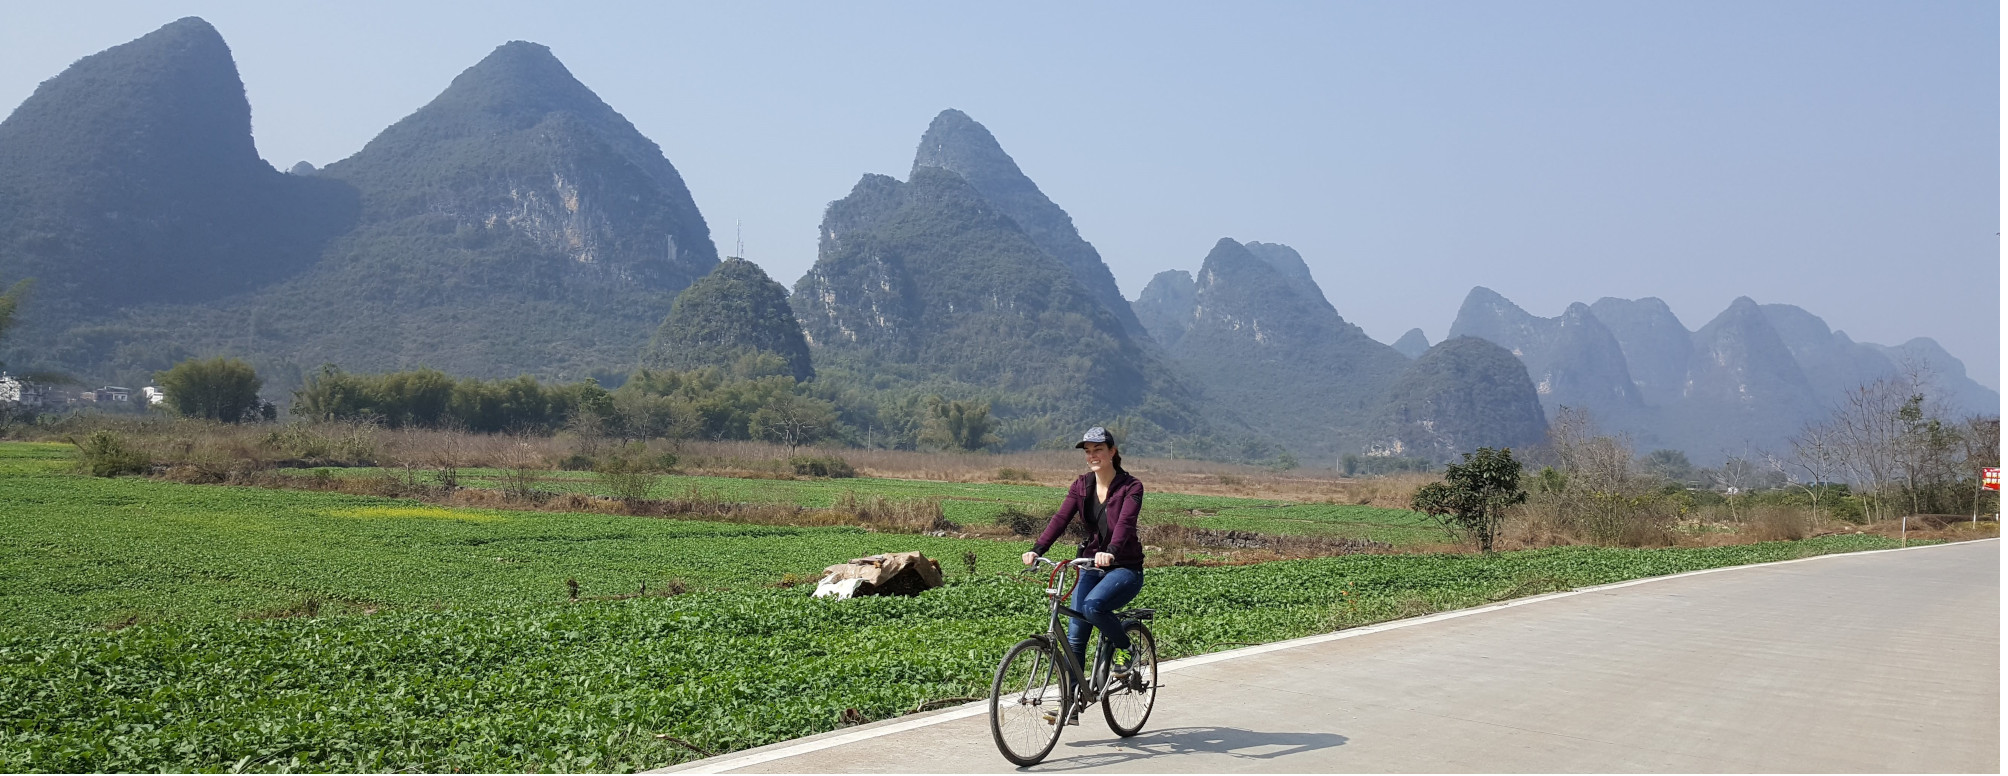 Boise travel agent, Jennifer, riding a bicycle in front of a karst mountain range in China.